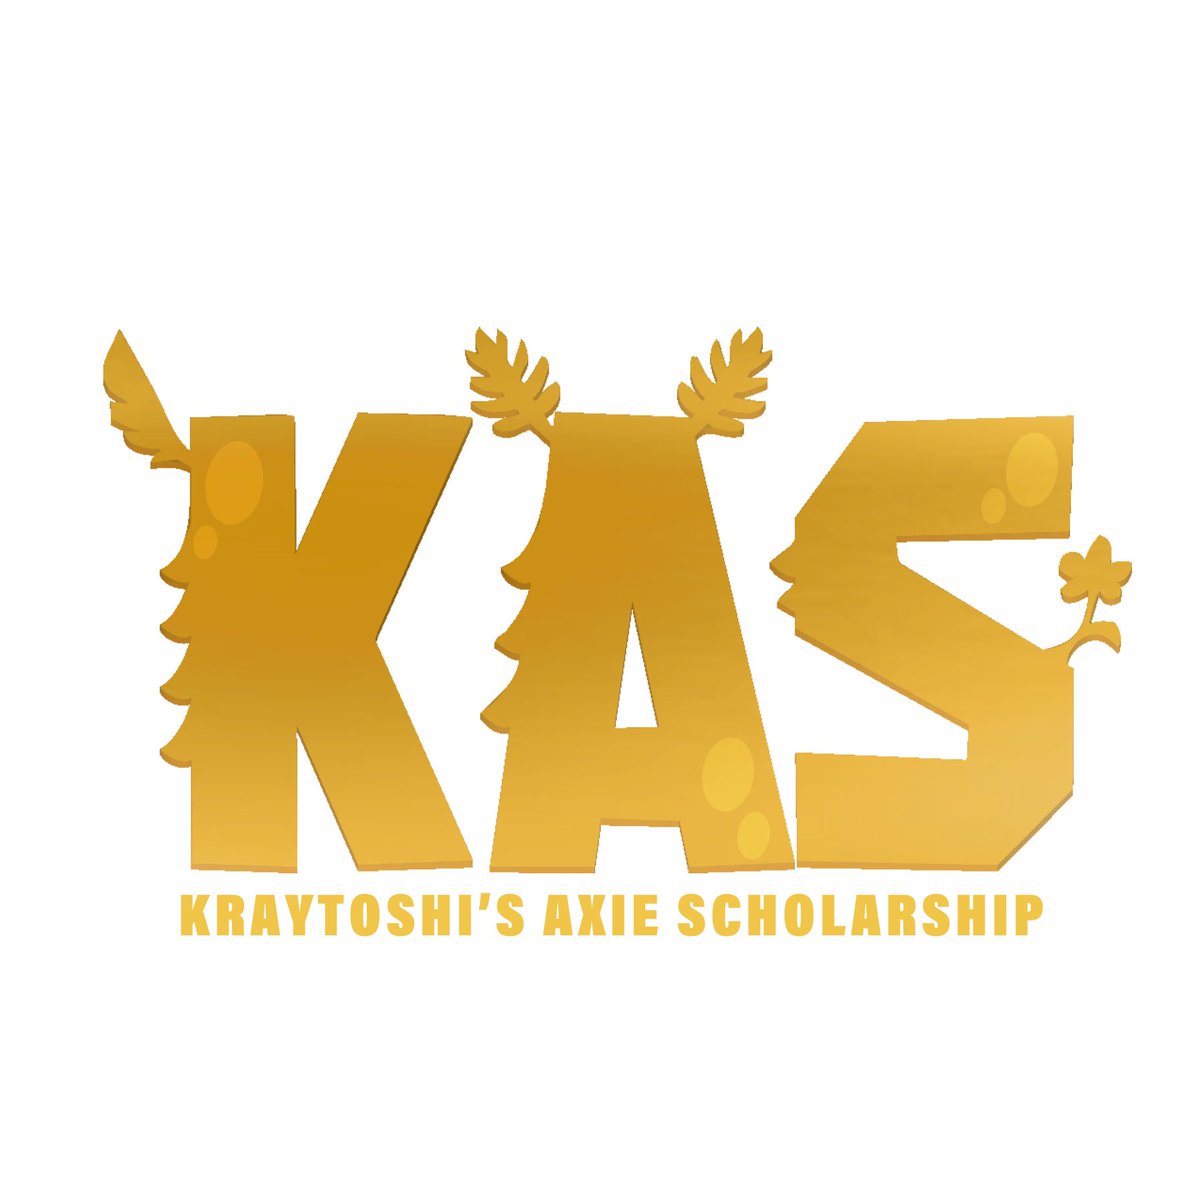 I would love to onboard 4 new Axie Scholars today. Comment why you should be chosen and what makes you a good scholar!! #AxieScholarship #AxieInfinityScholar #PlayToEarn